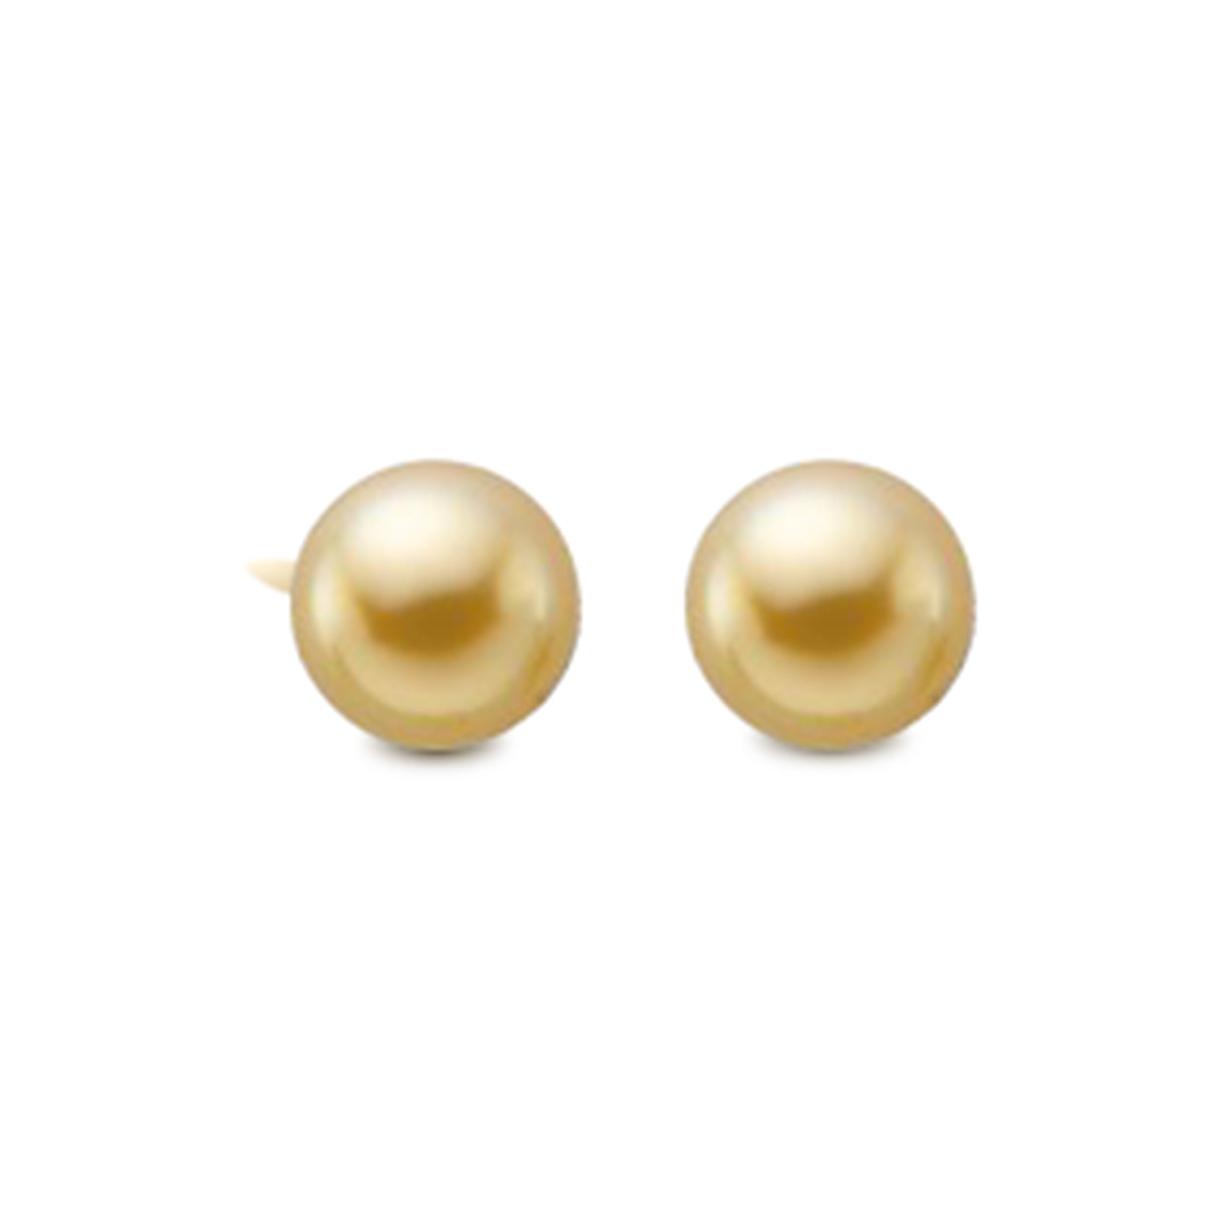 Child's Yellow Gold Ball Earrings, 4mm 0